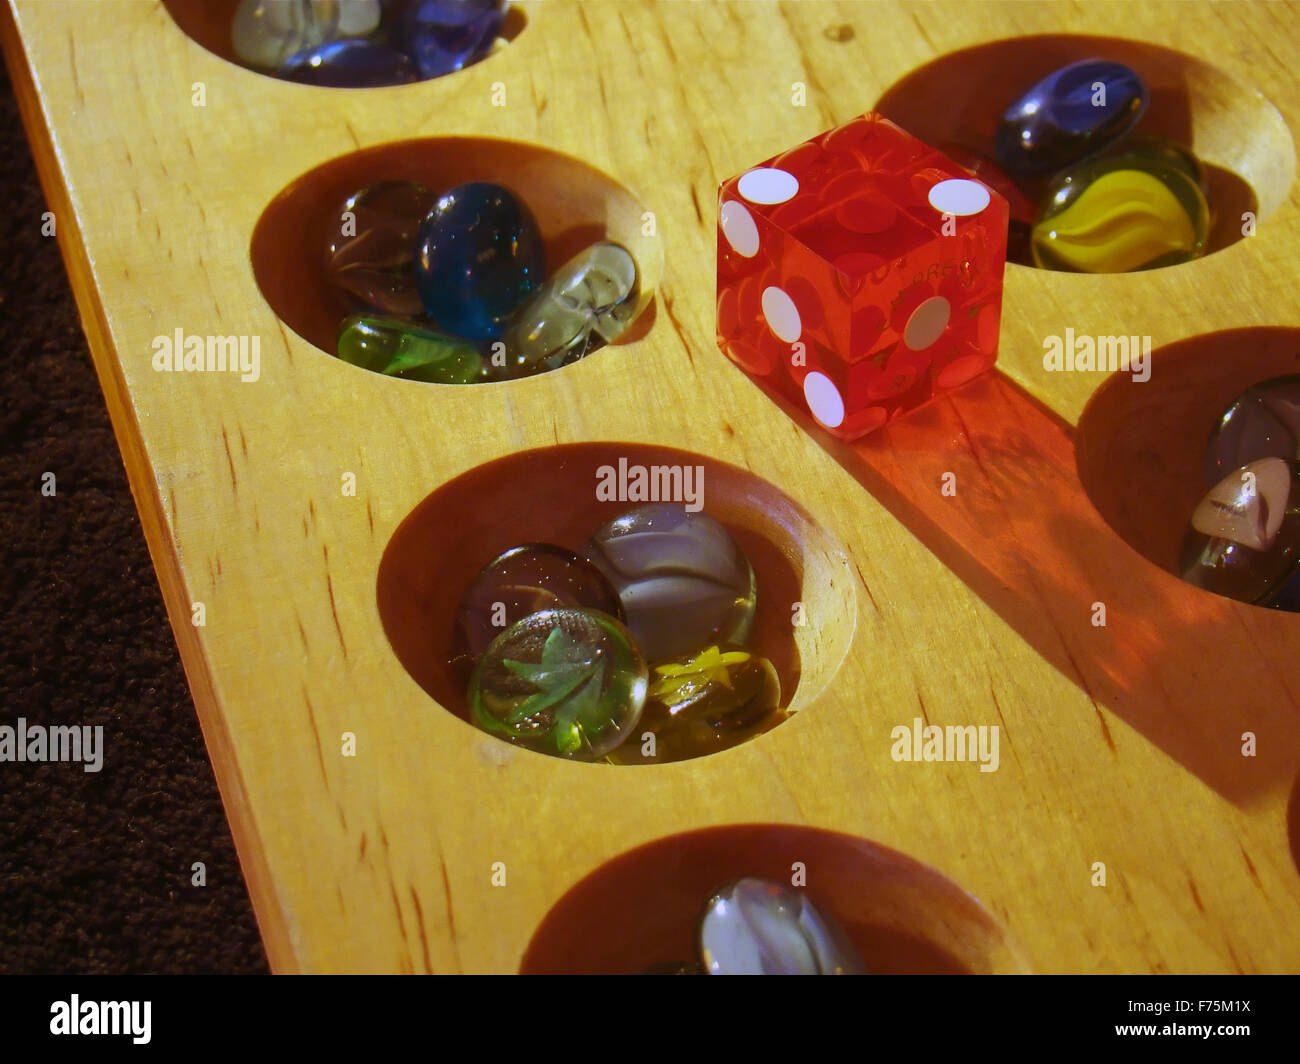 A Game Of Mancala Stock Photo by ©Foto.Toch 160874502